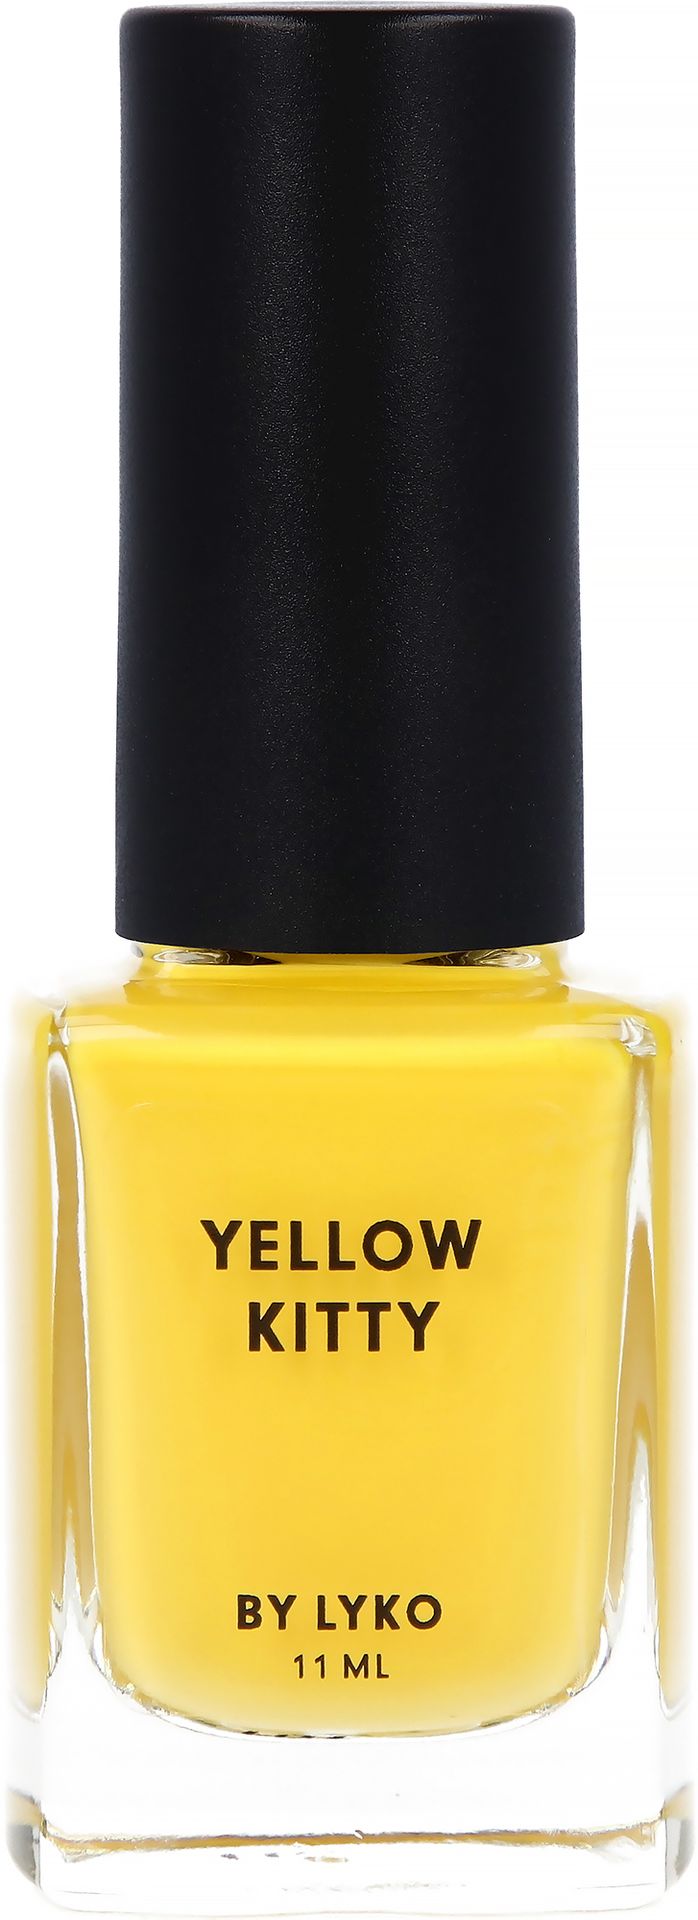 By Lyko Sunny Days Collection Nail Polish 067 Yellow Kitty